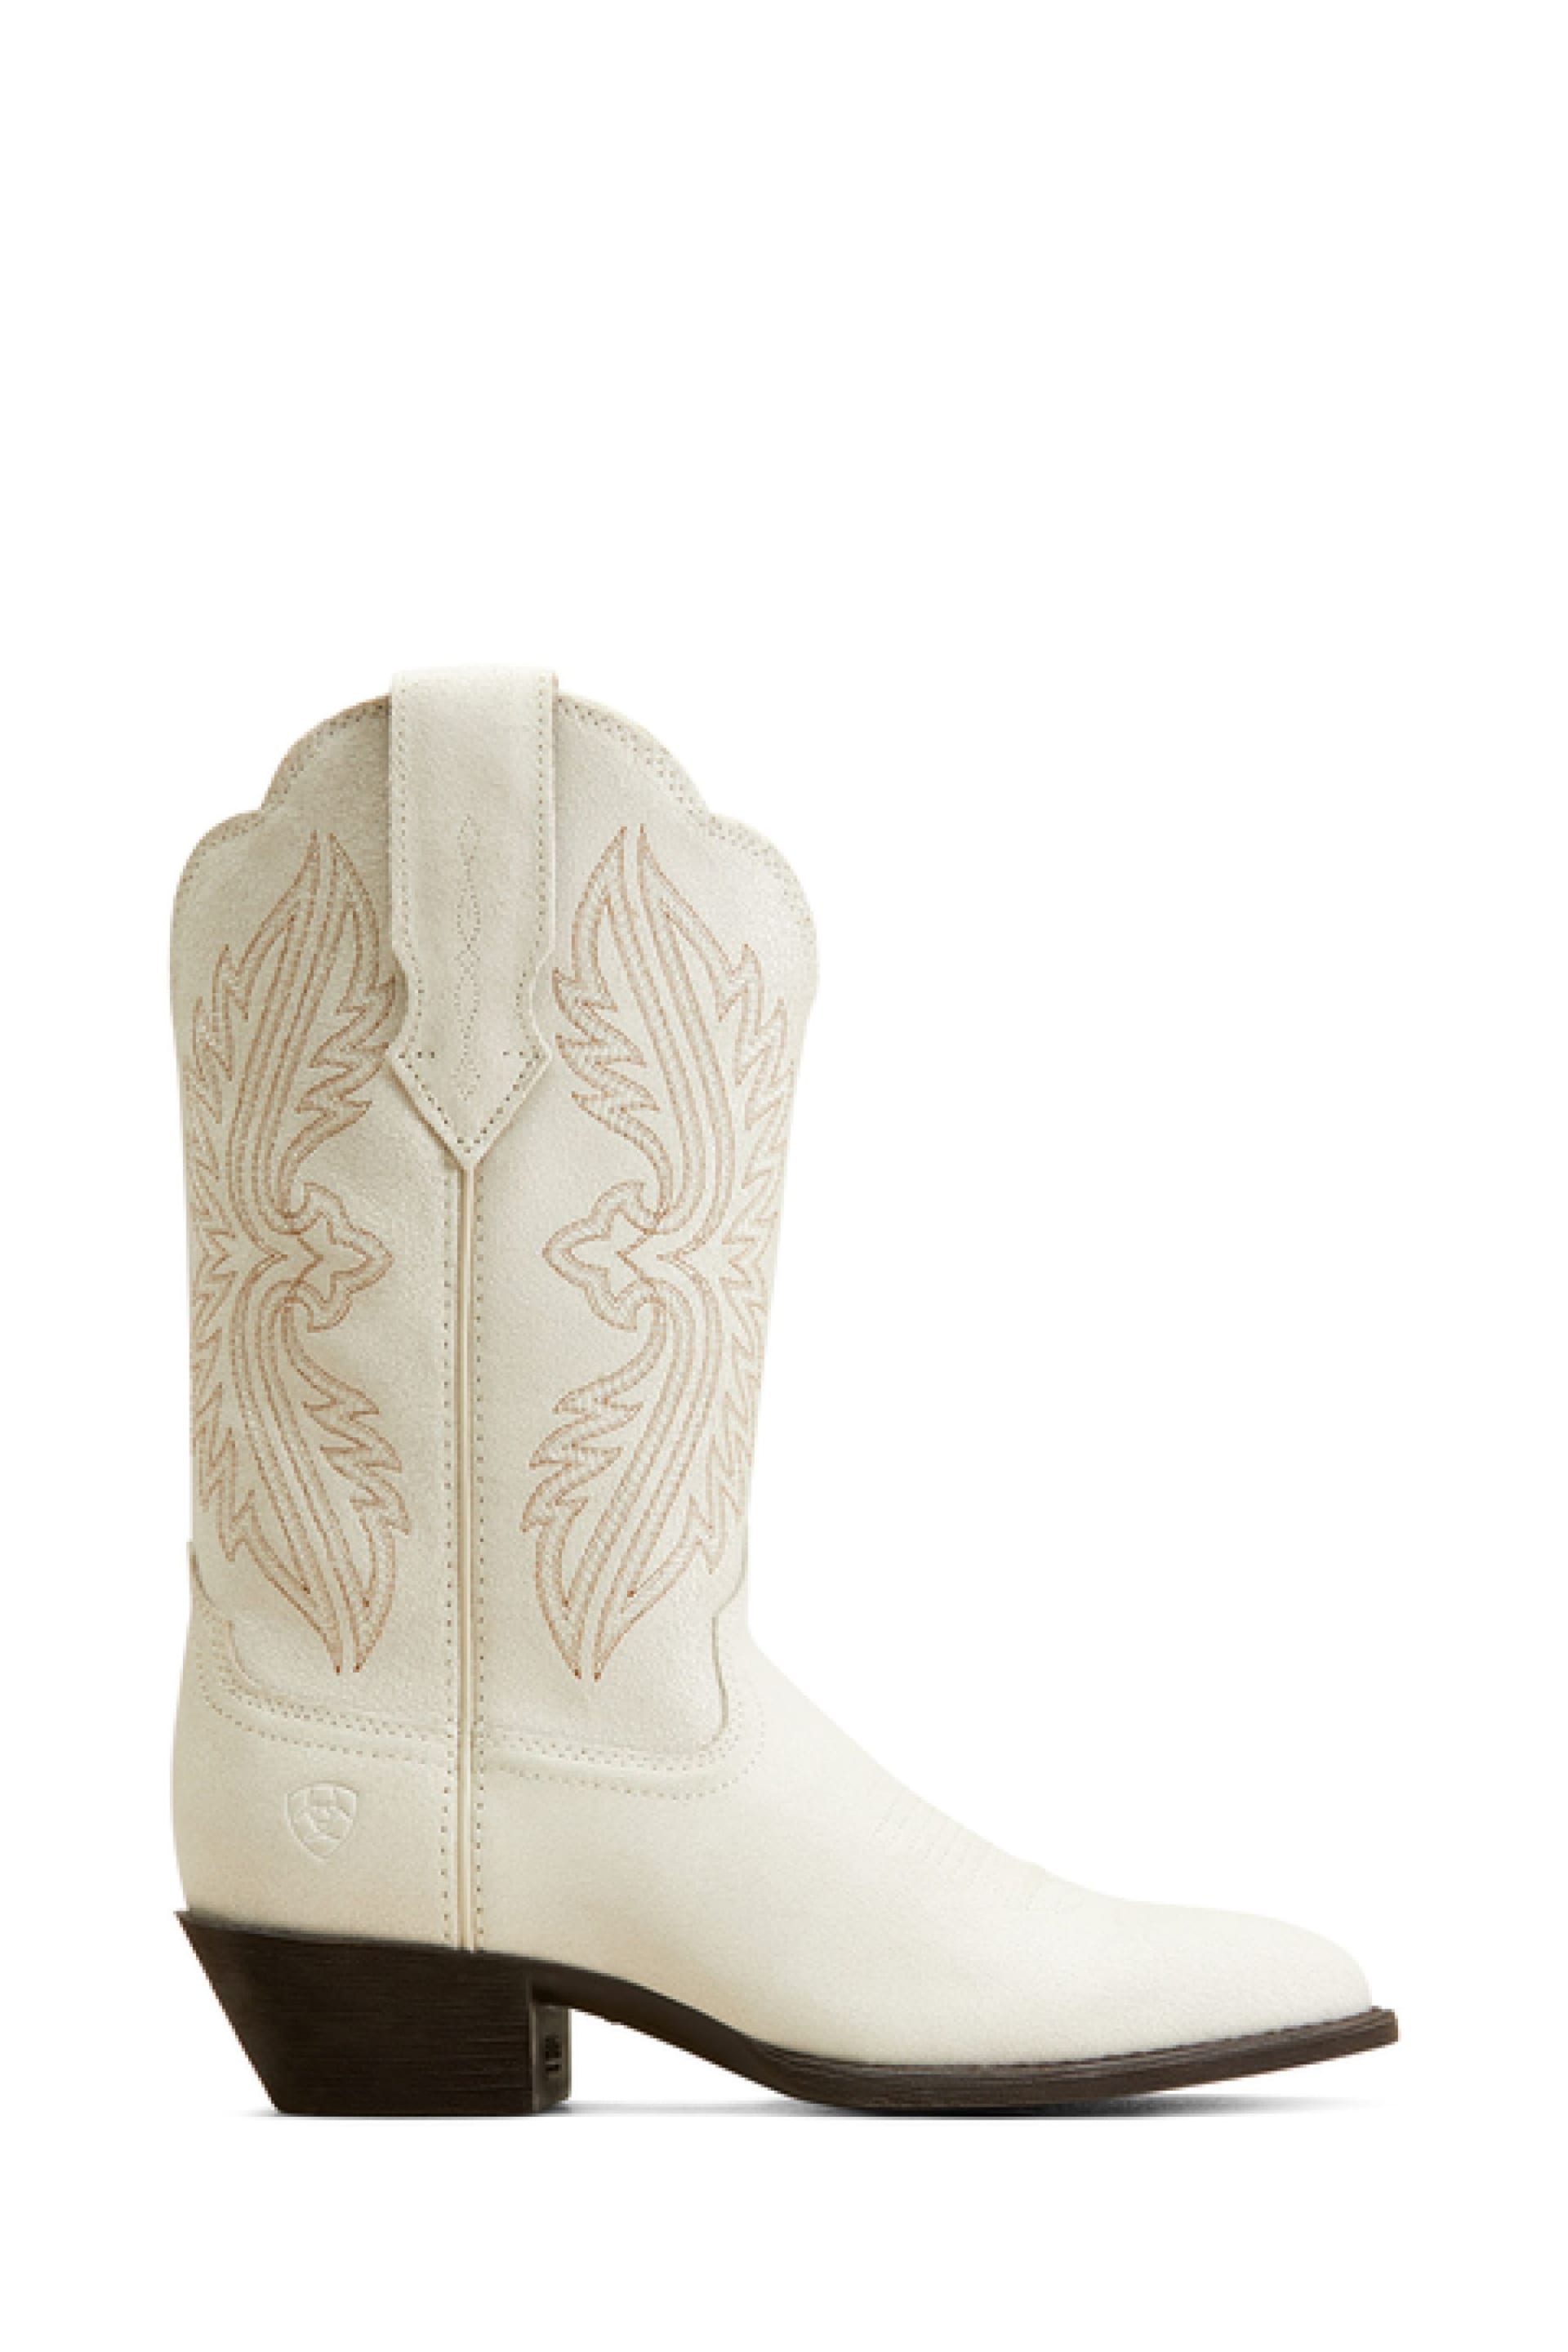 Ariat Heritage R Toe Strech Fit Boots - Image 1 of 3